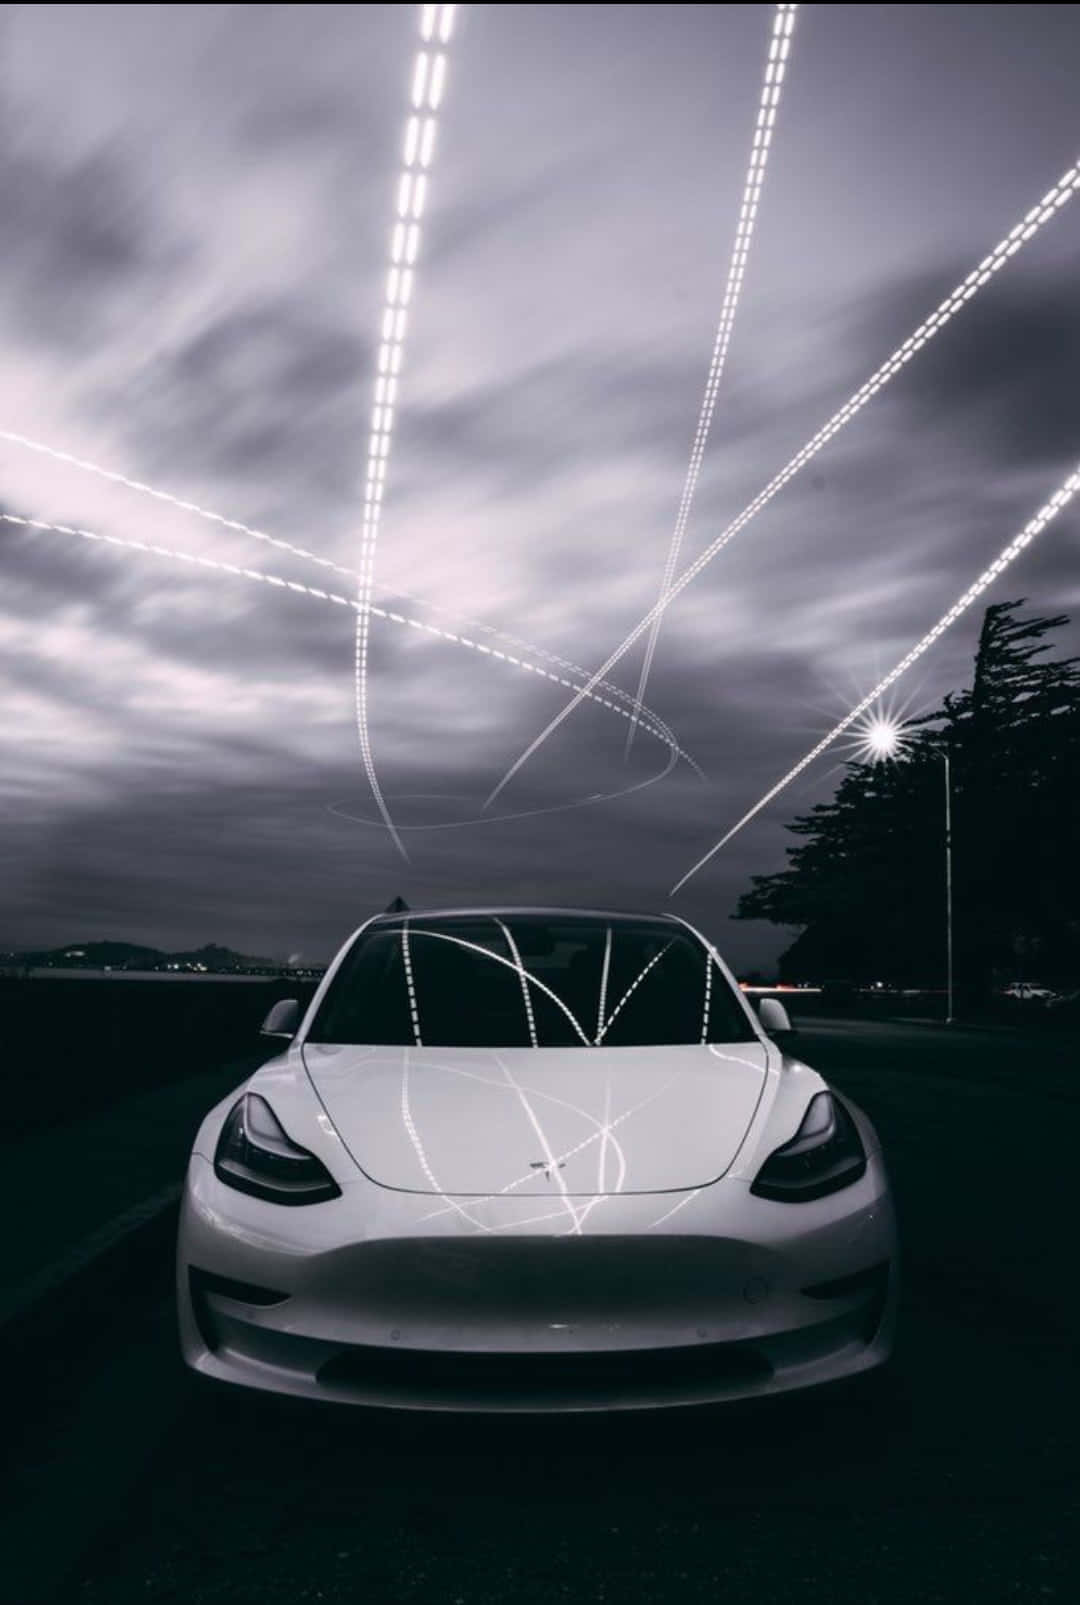 "The Ultimate Tech Combination - Tesla and iPhone" Wallpaper